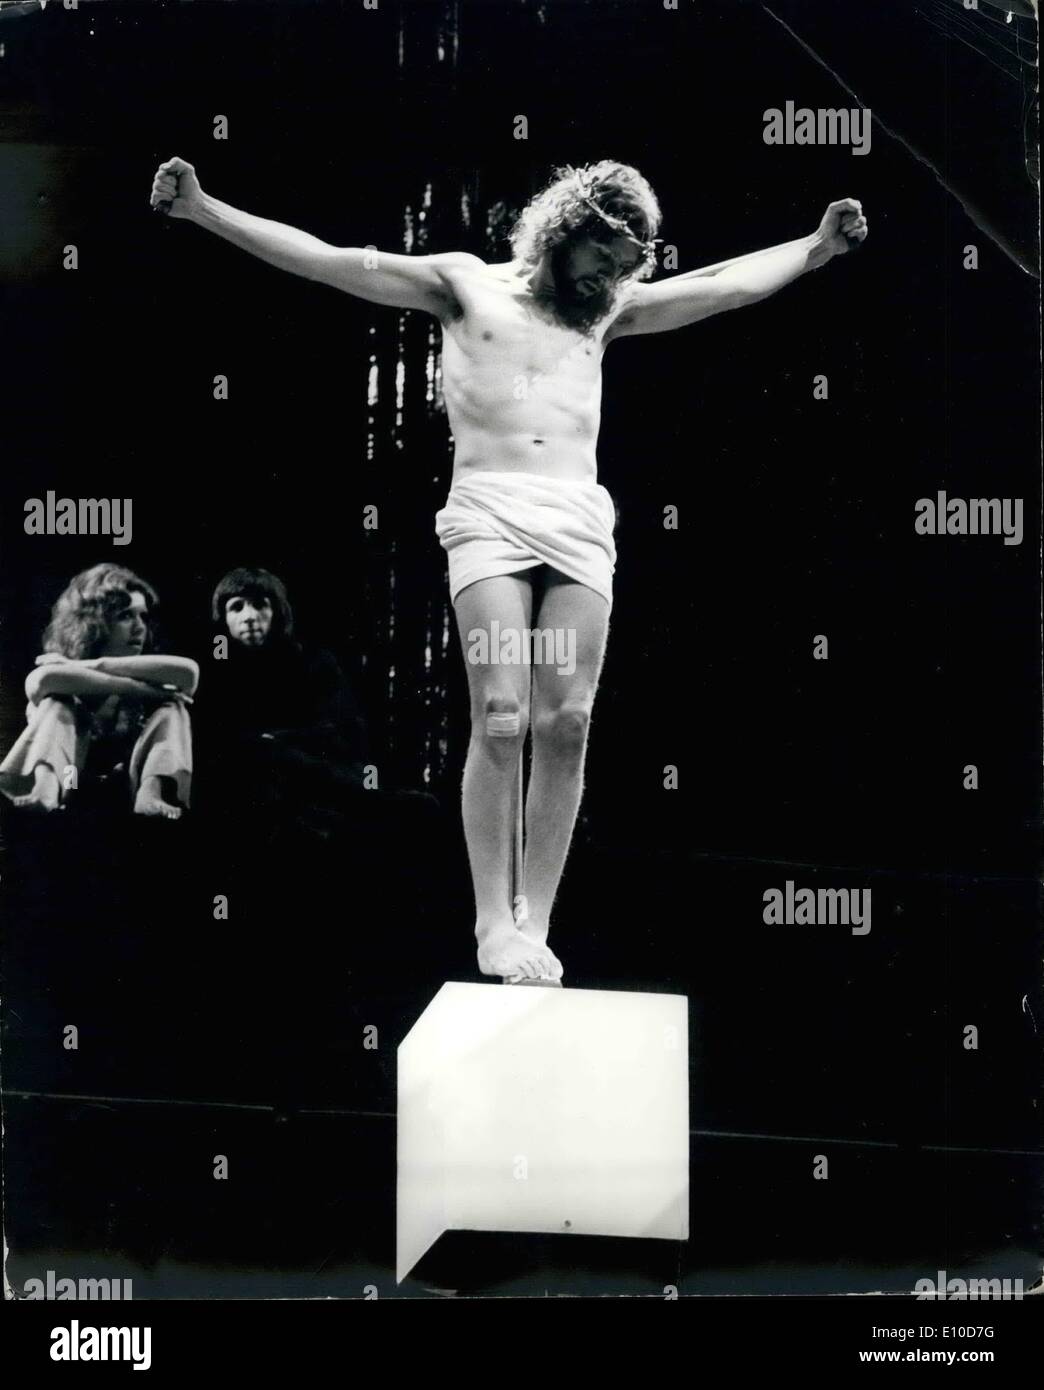 Jul. 07, 1972 - Dress rehearsal for Jesus Christ Superstar: There was a full dress rehearsal today for Jesus Christ Superstar, the musical which opens at the Palace Theatre, London, on August 9th, with previews from tomorrow. The role of Mary Magdalene, which was to have been played by singe Sylvie McNeill, who has left to show, will now be played by Dana Gillespie. The leading role of Jesus Christ is played by Paul Nicholas. Photo shows Paul Nicholas, who plays the role of Jesus Christ, pictured during today's rehearsal at the Palace Theatre. Stock Photo